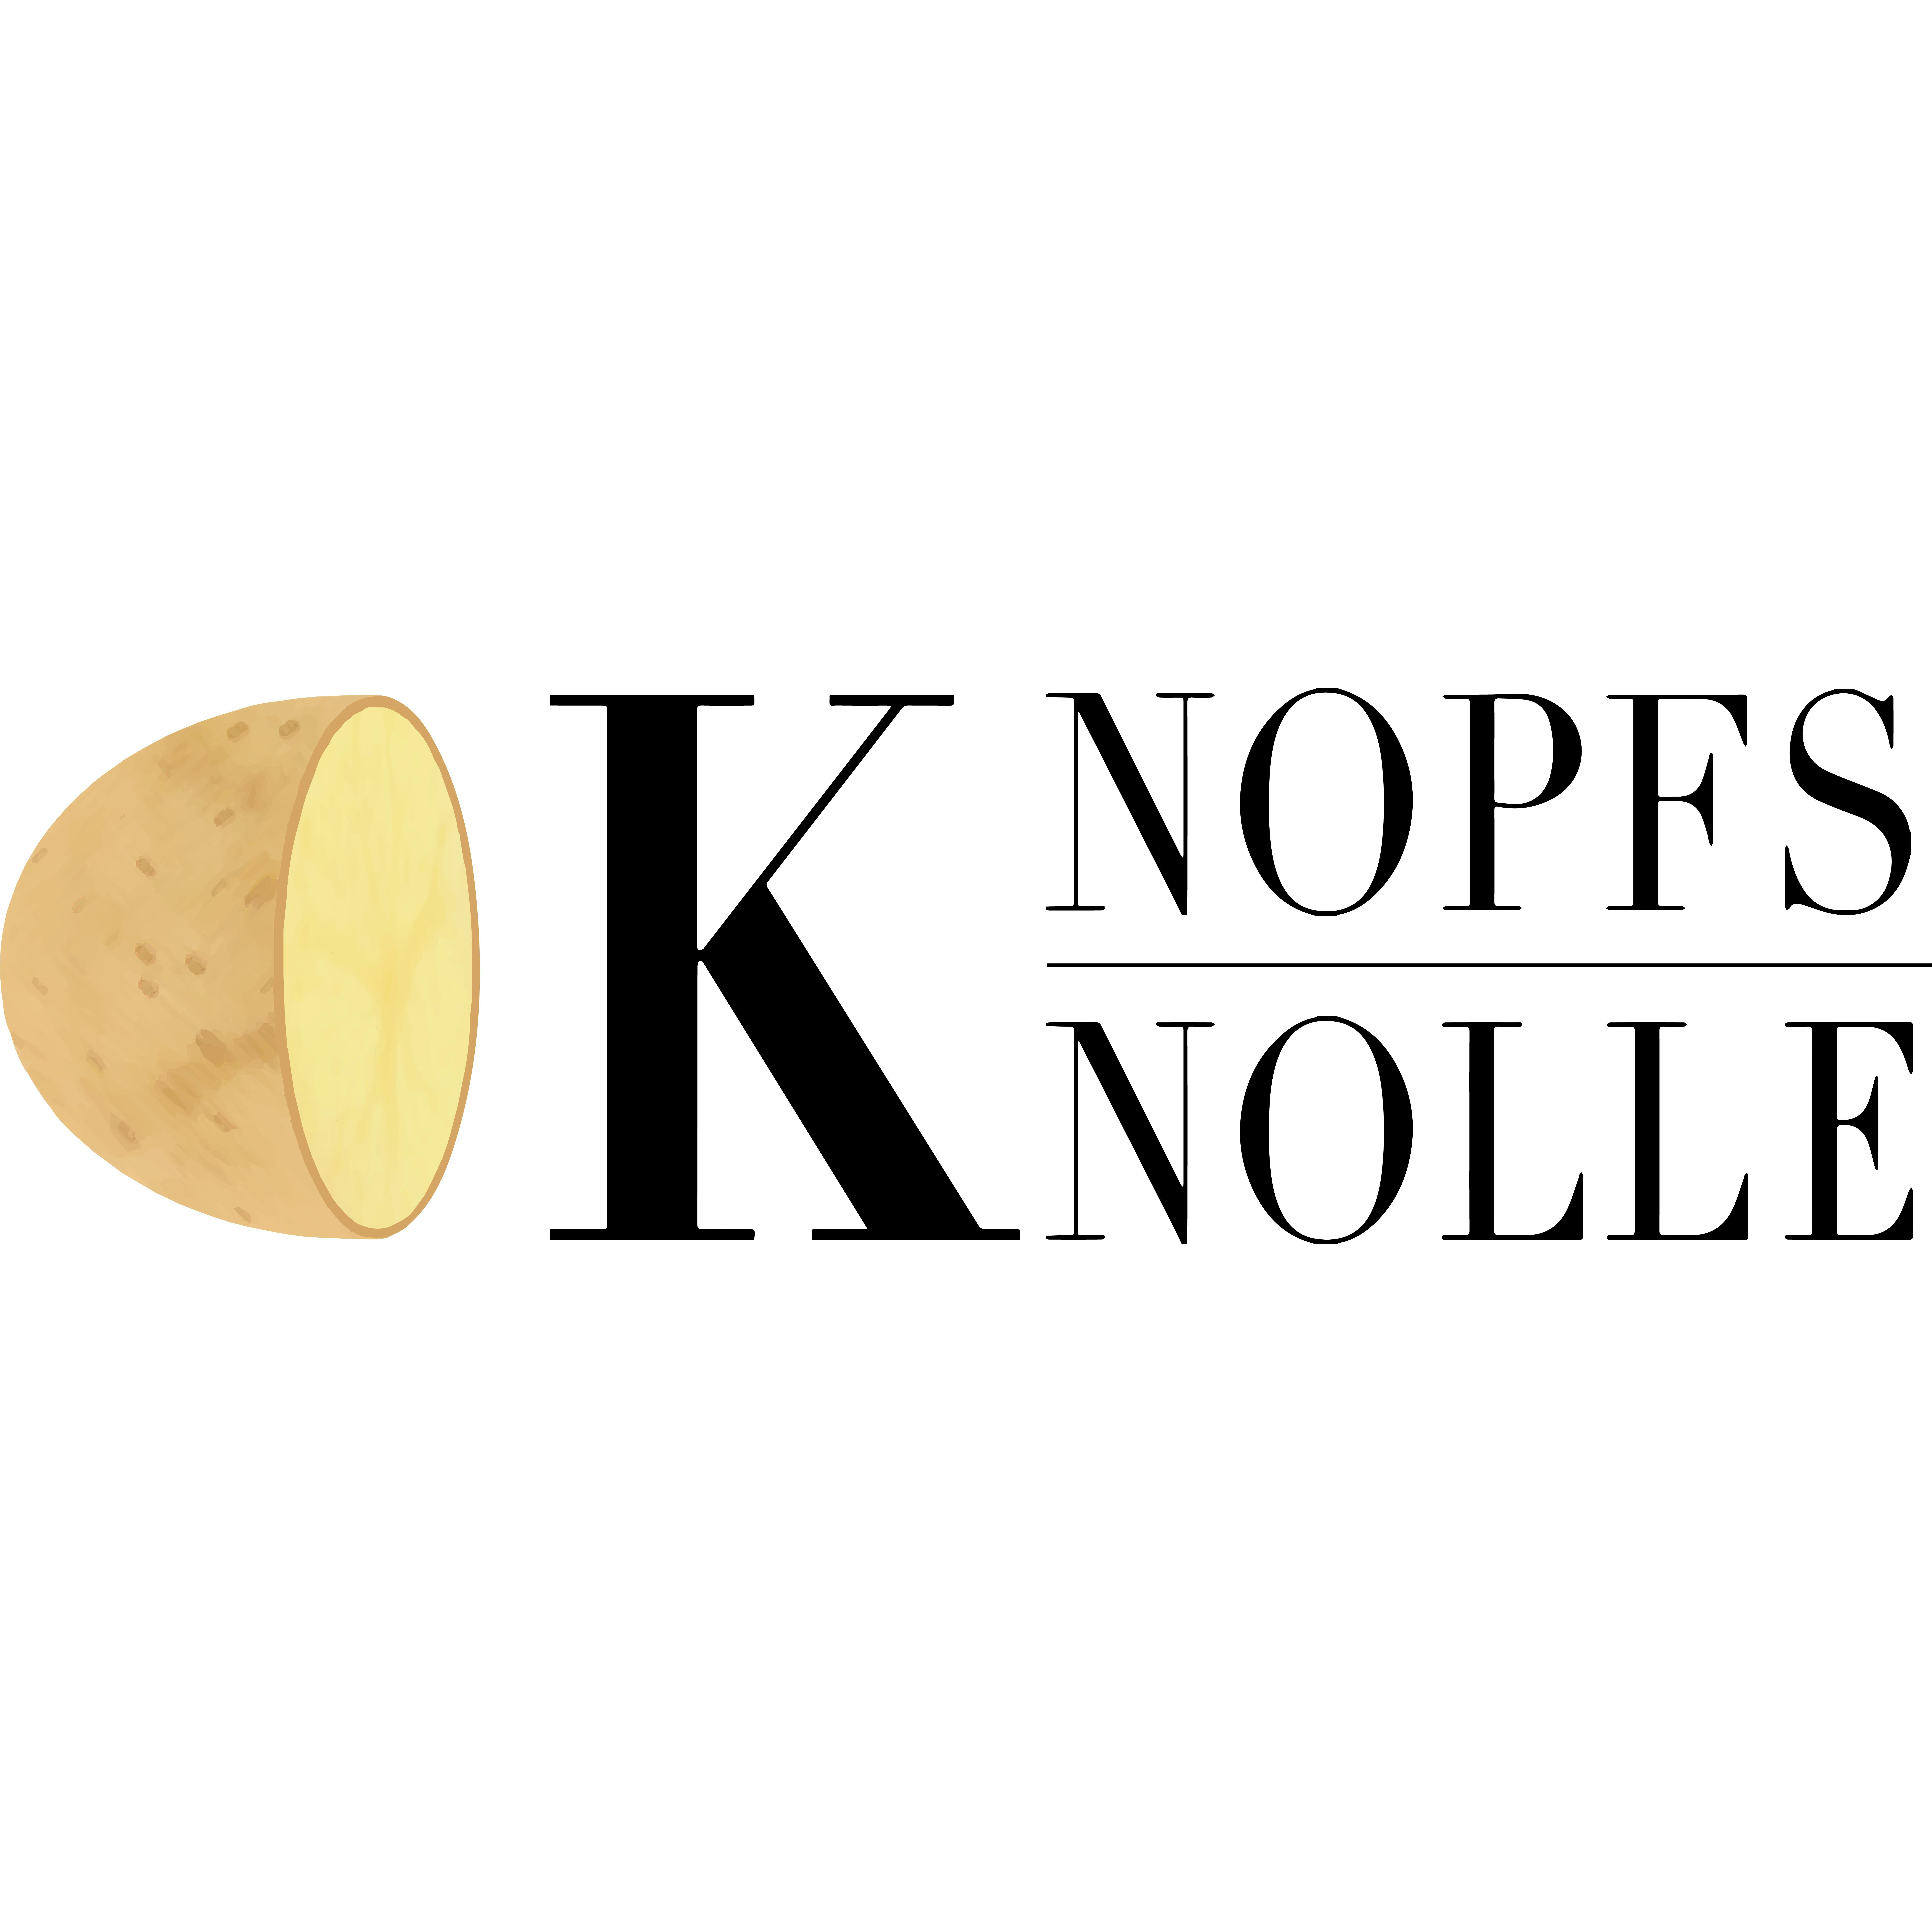 Knopfs Knolle